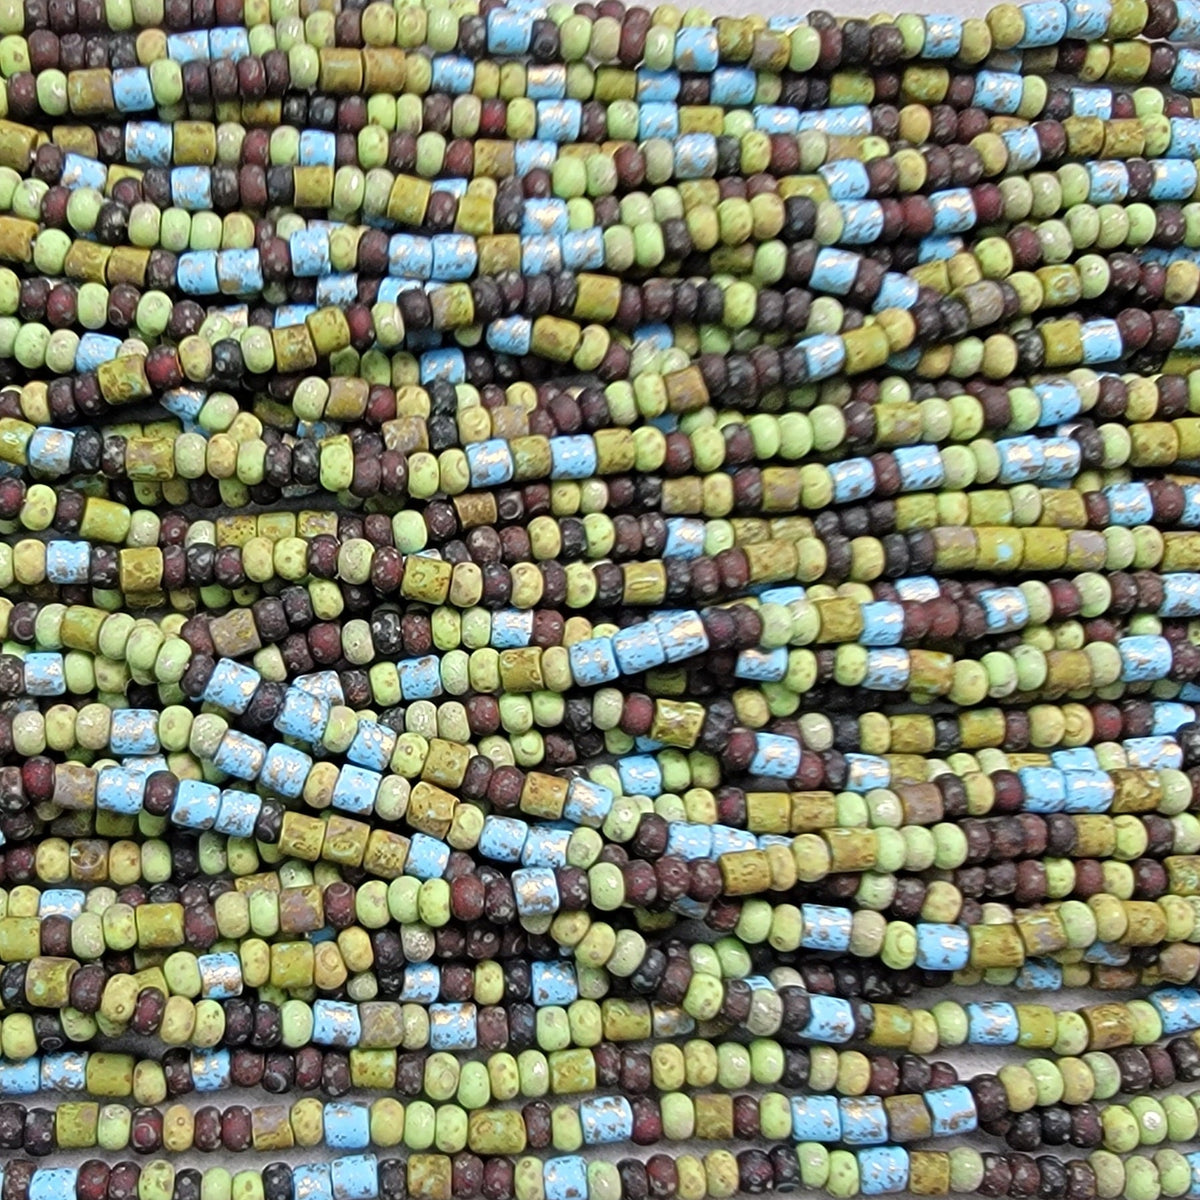 4mm Czech Aged Picasso Beads, Wrap Bracelet Beads, Glass Beads, Seed Beads,  Multicolored Beads, Patterned Beads 